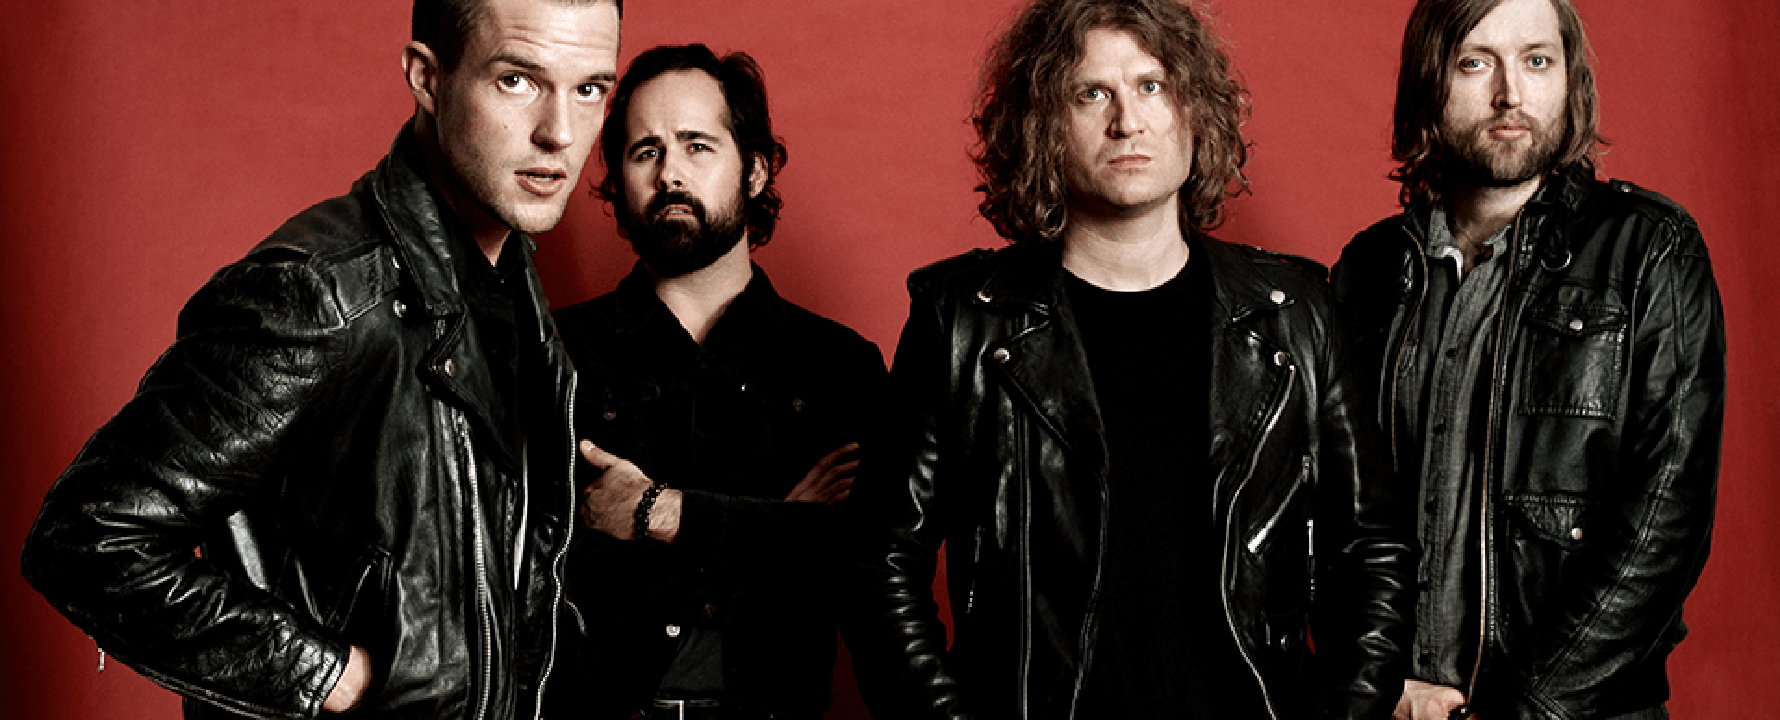 Promotional photograph of The Killers.